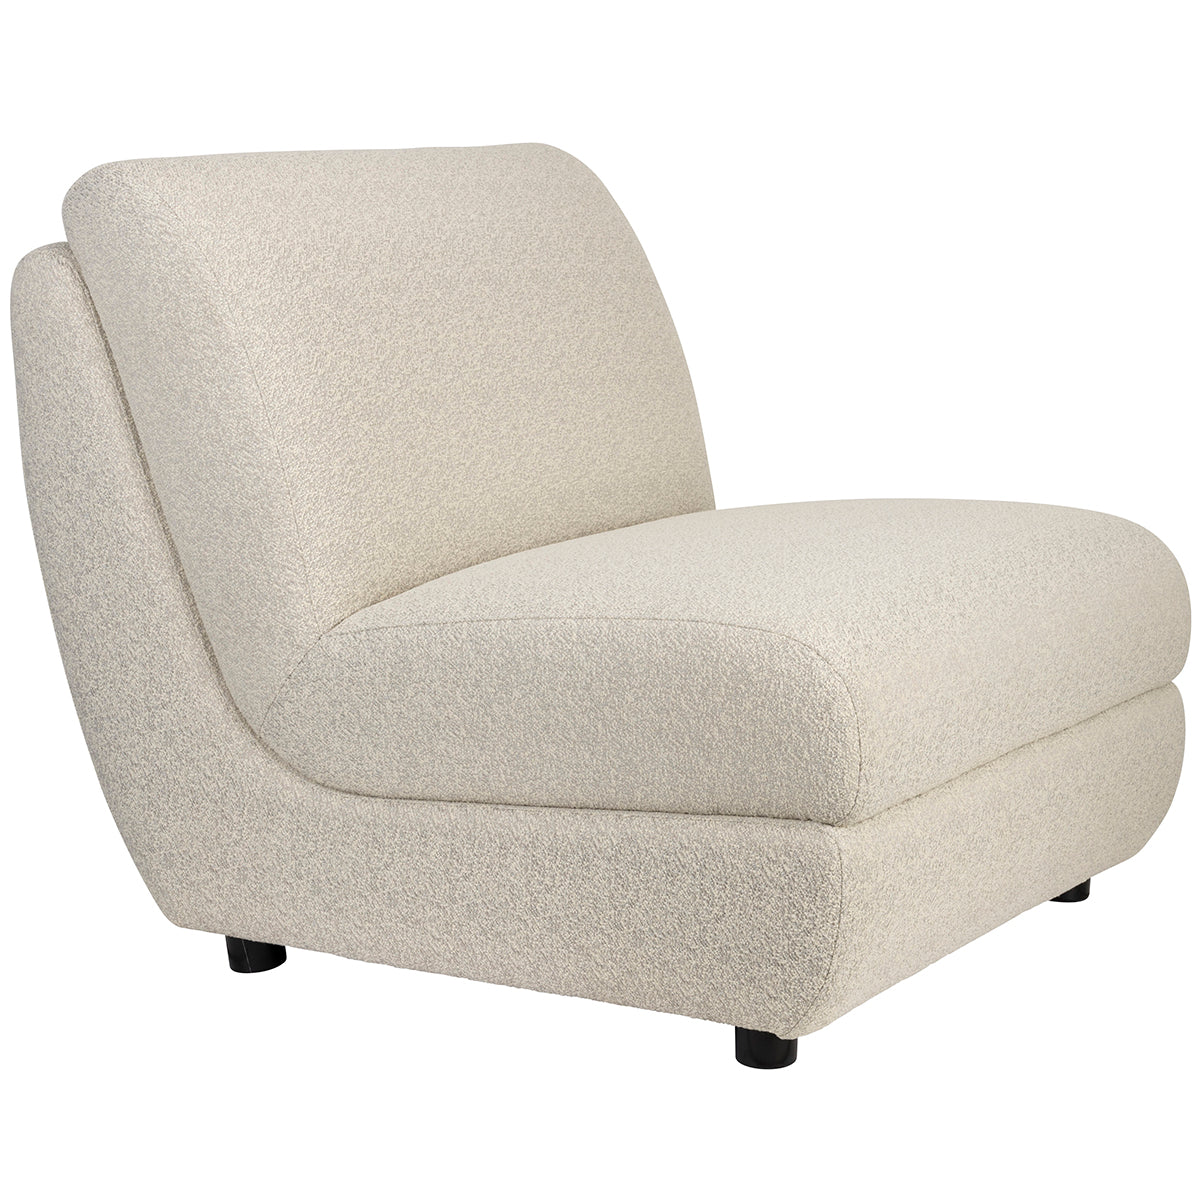 Mississippi Beige Outdoor Lounge Chair